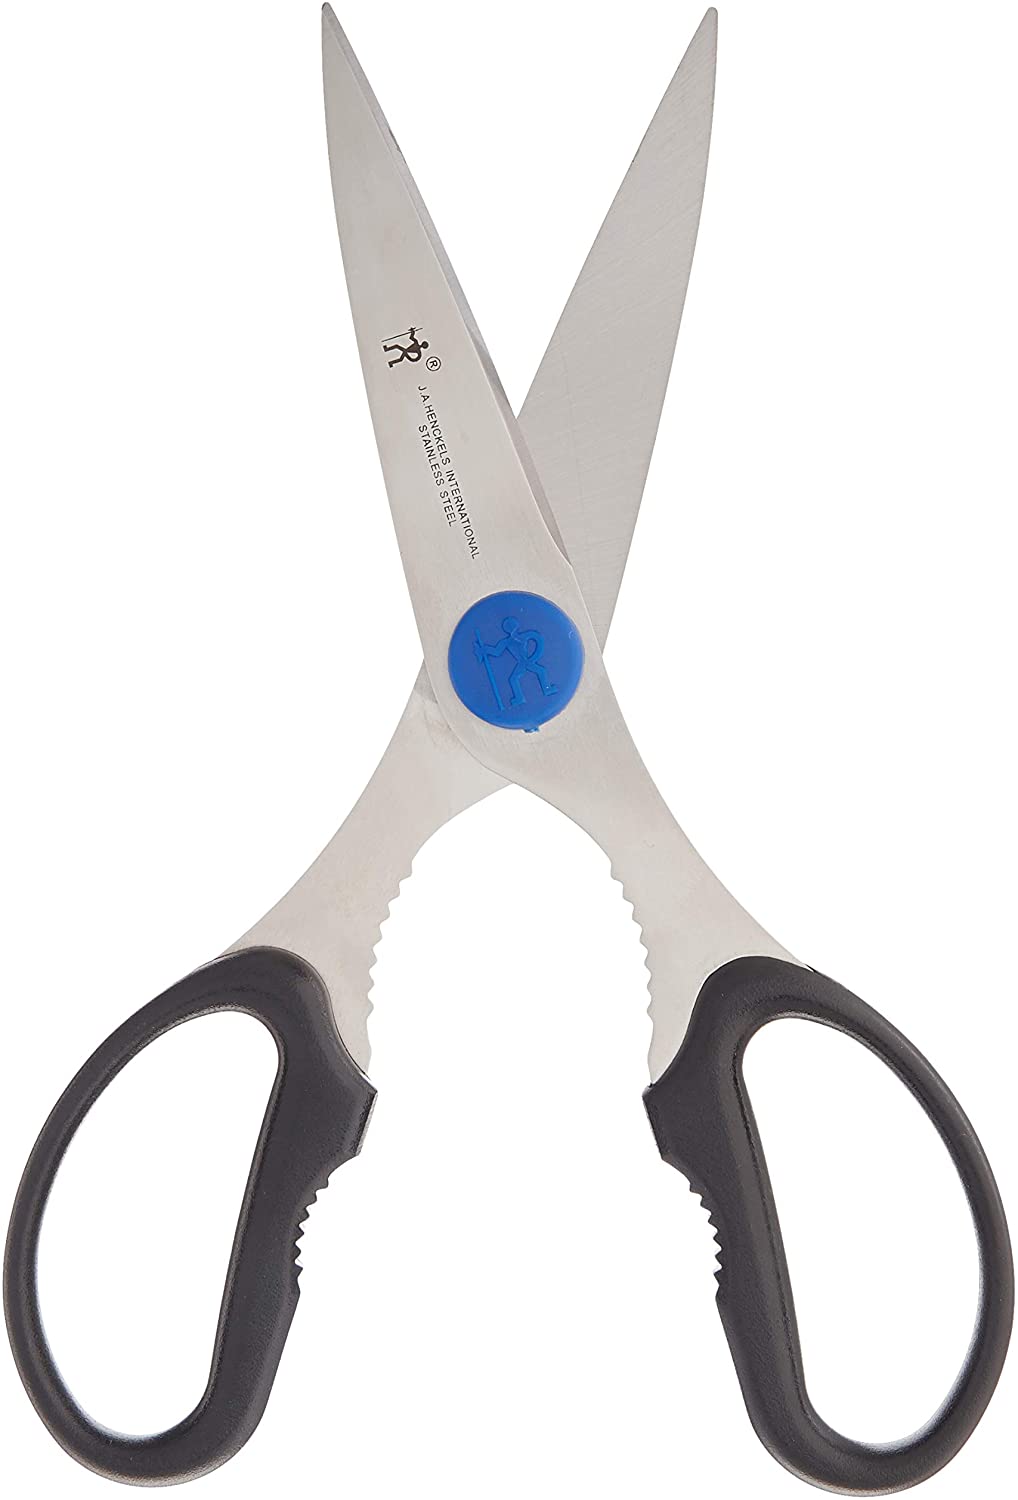 top view of the take apart kitchen shears displayed open on a white background